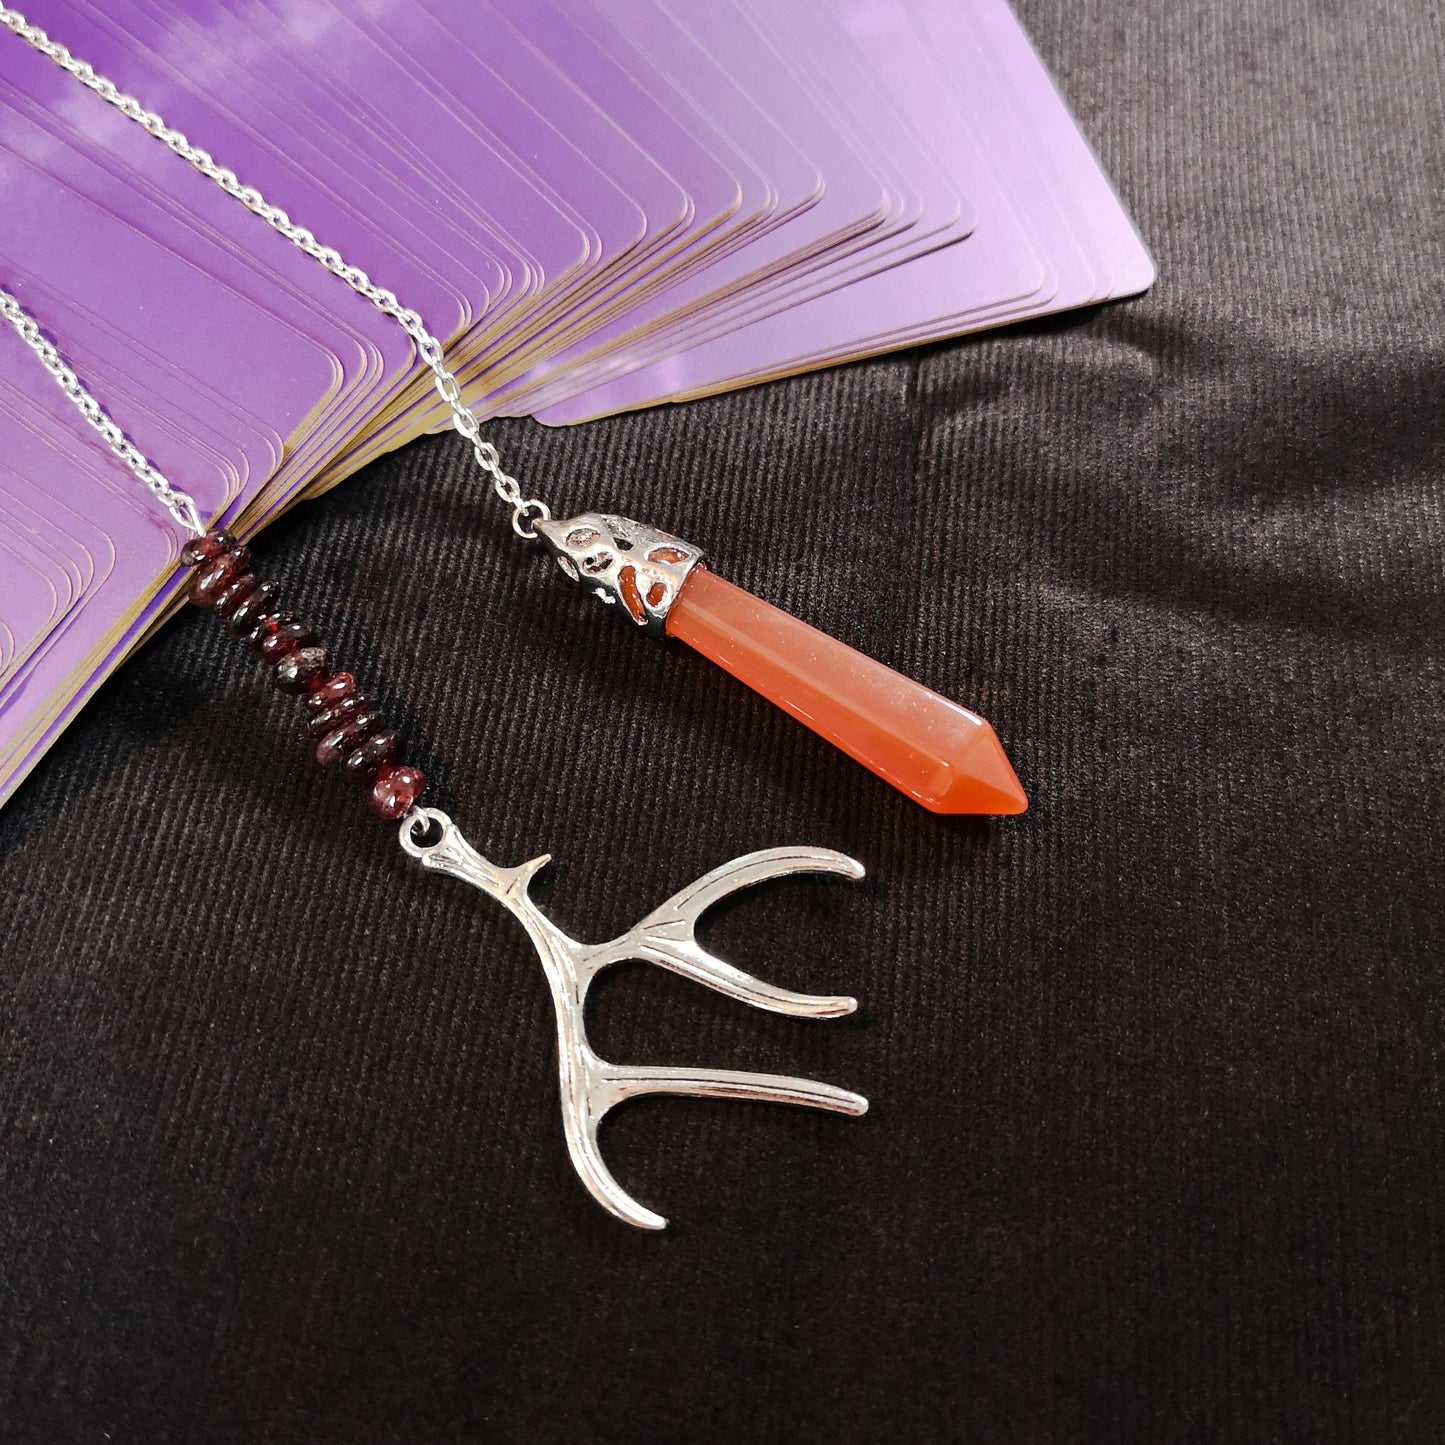 Carnelian, garnet and antler dowsing pendulum - The French Witch shop